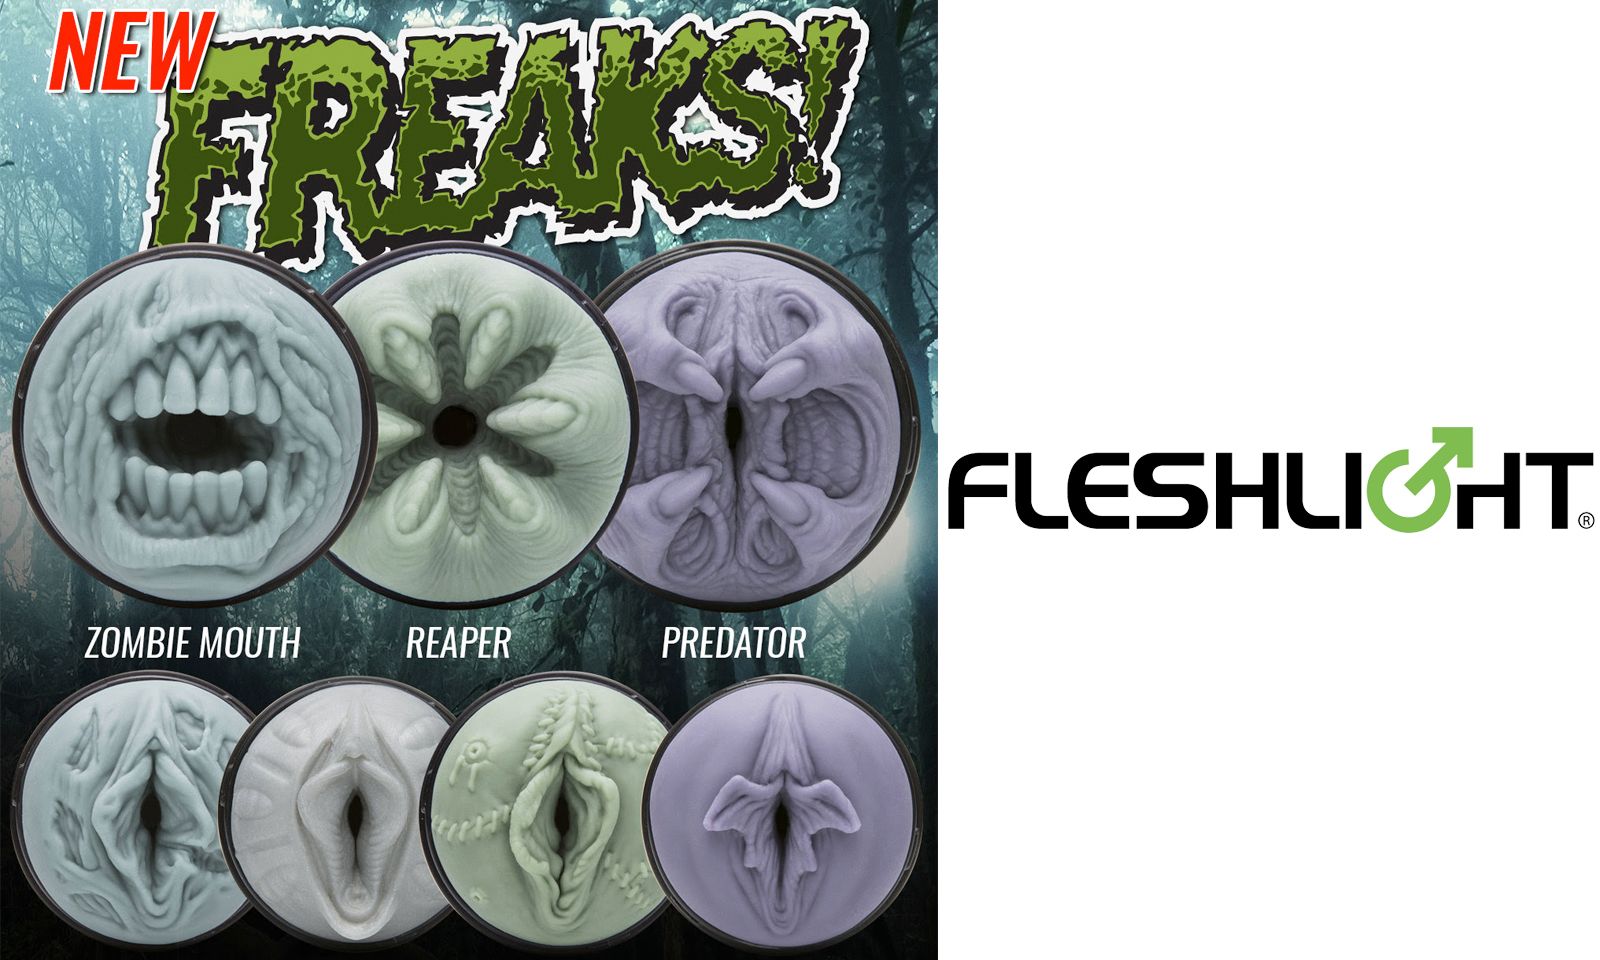 Fleshlight Adding New Designs to Freaks Collection